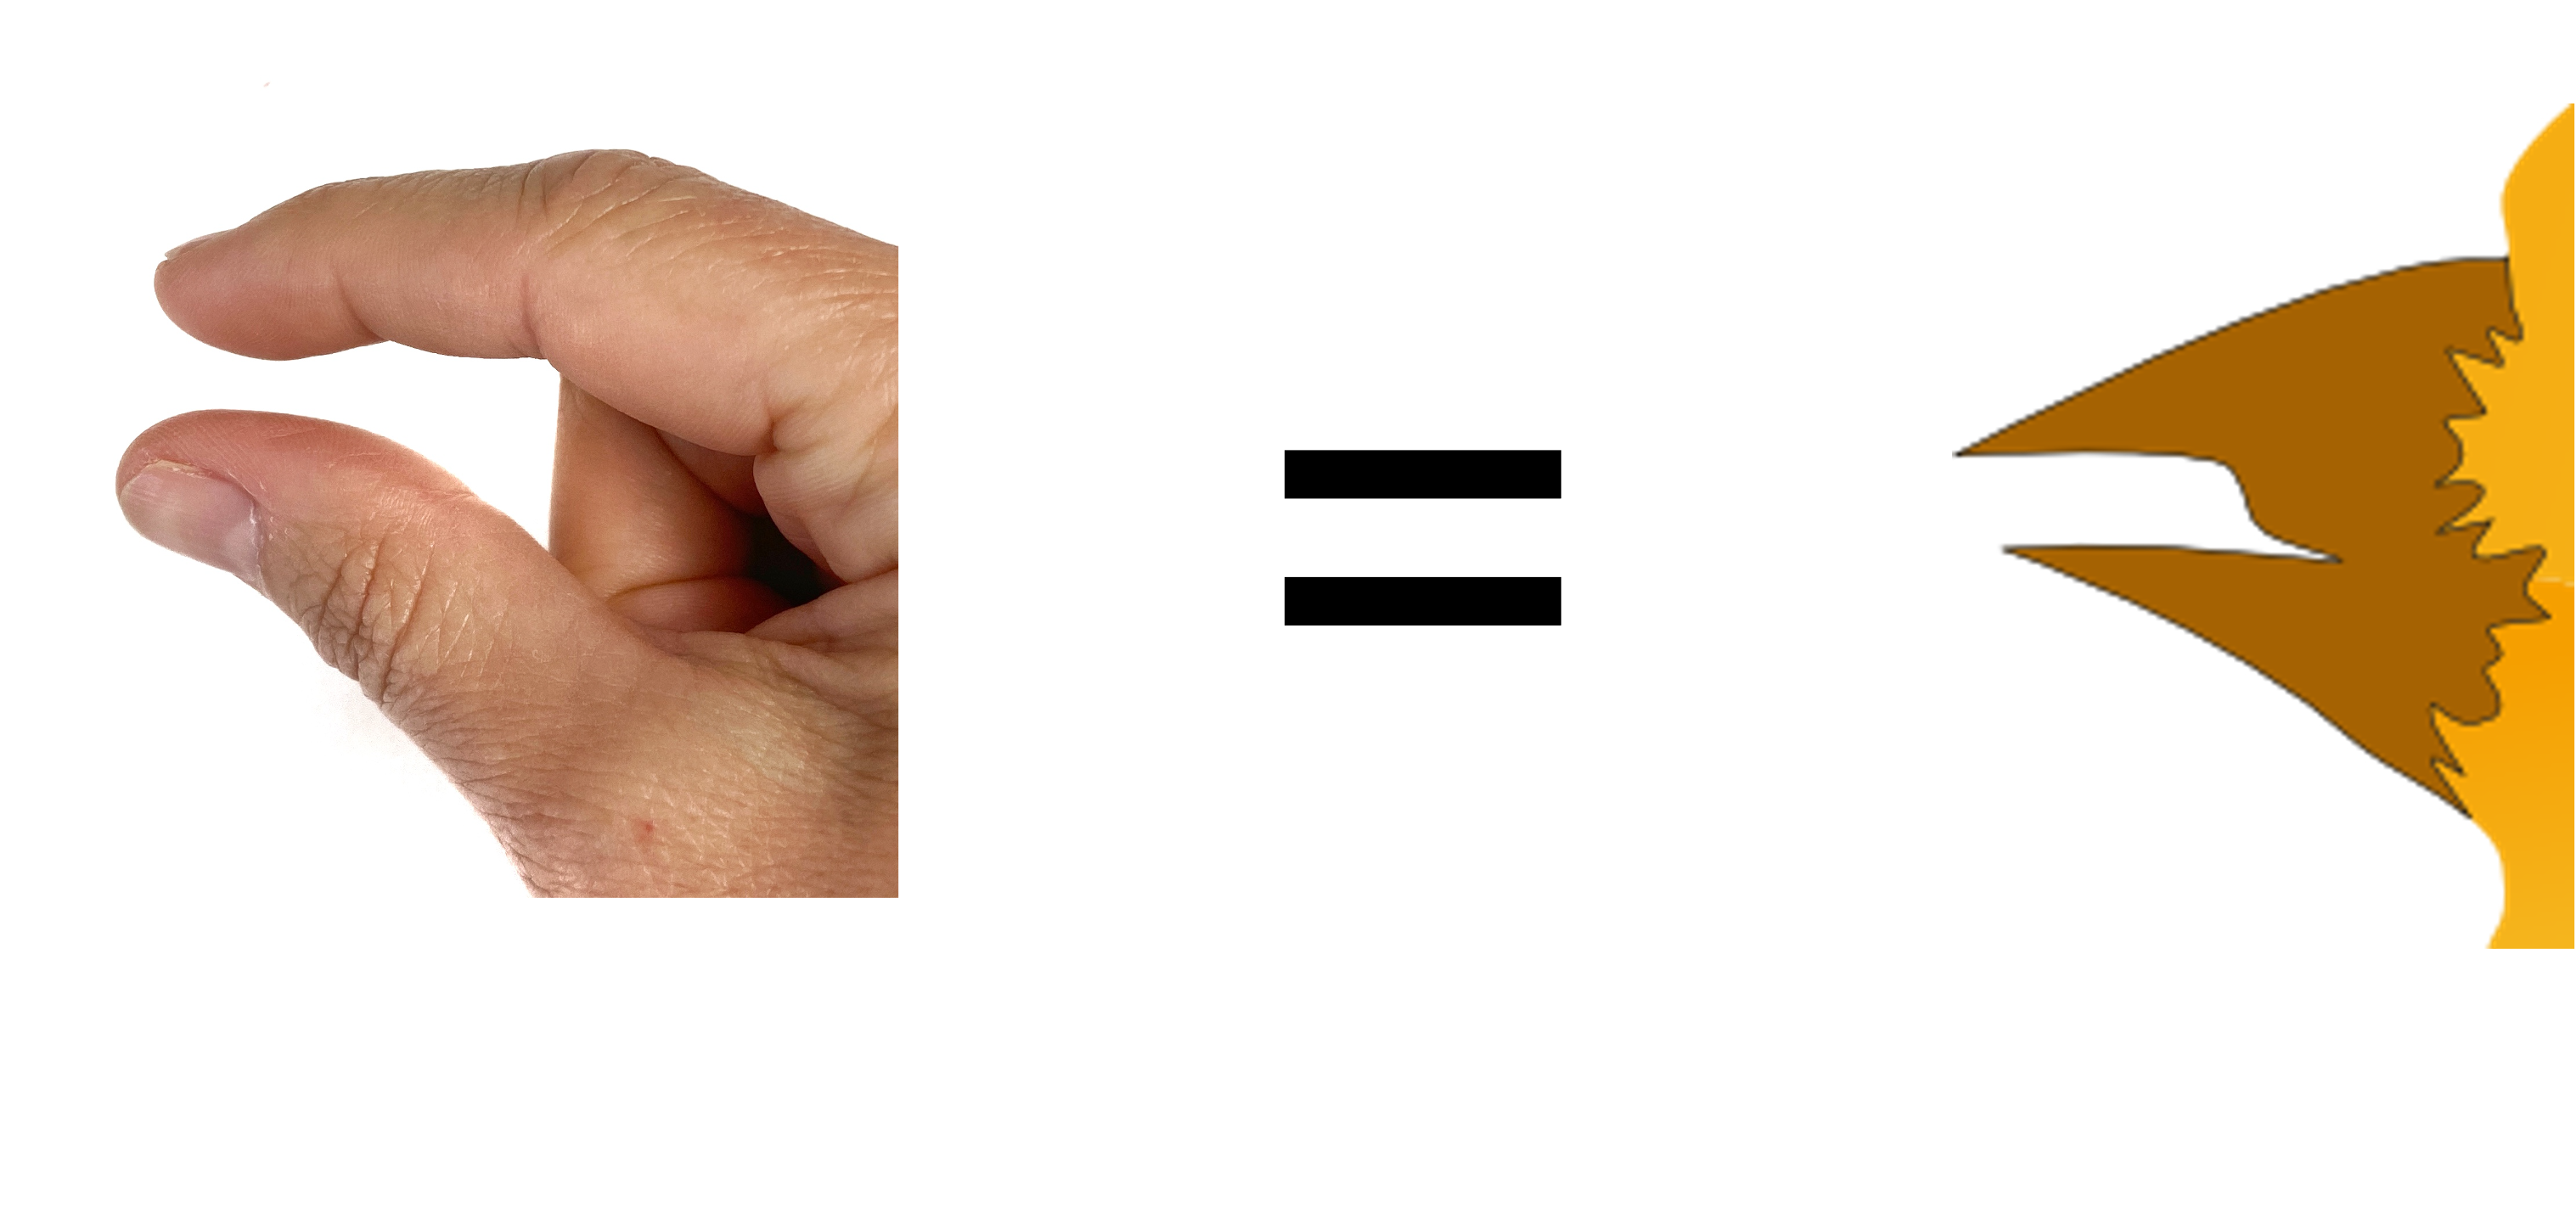 Pointer finger and thumb in a pincer grip representing a beak. Right: Drawing of a bird's beak shows a similar shape.